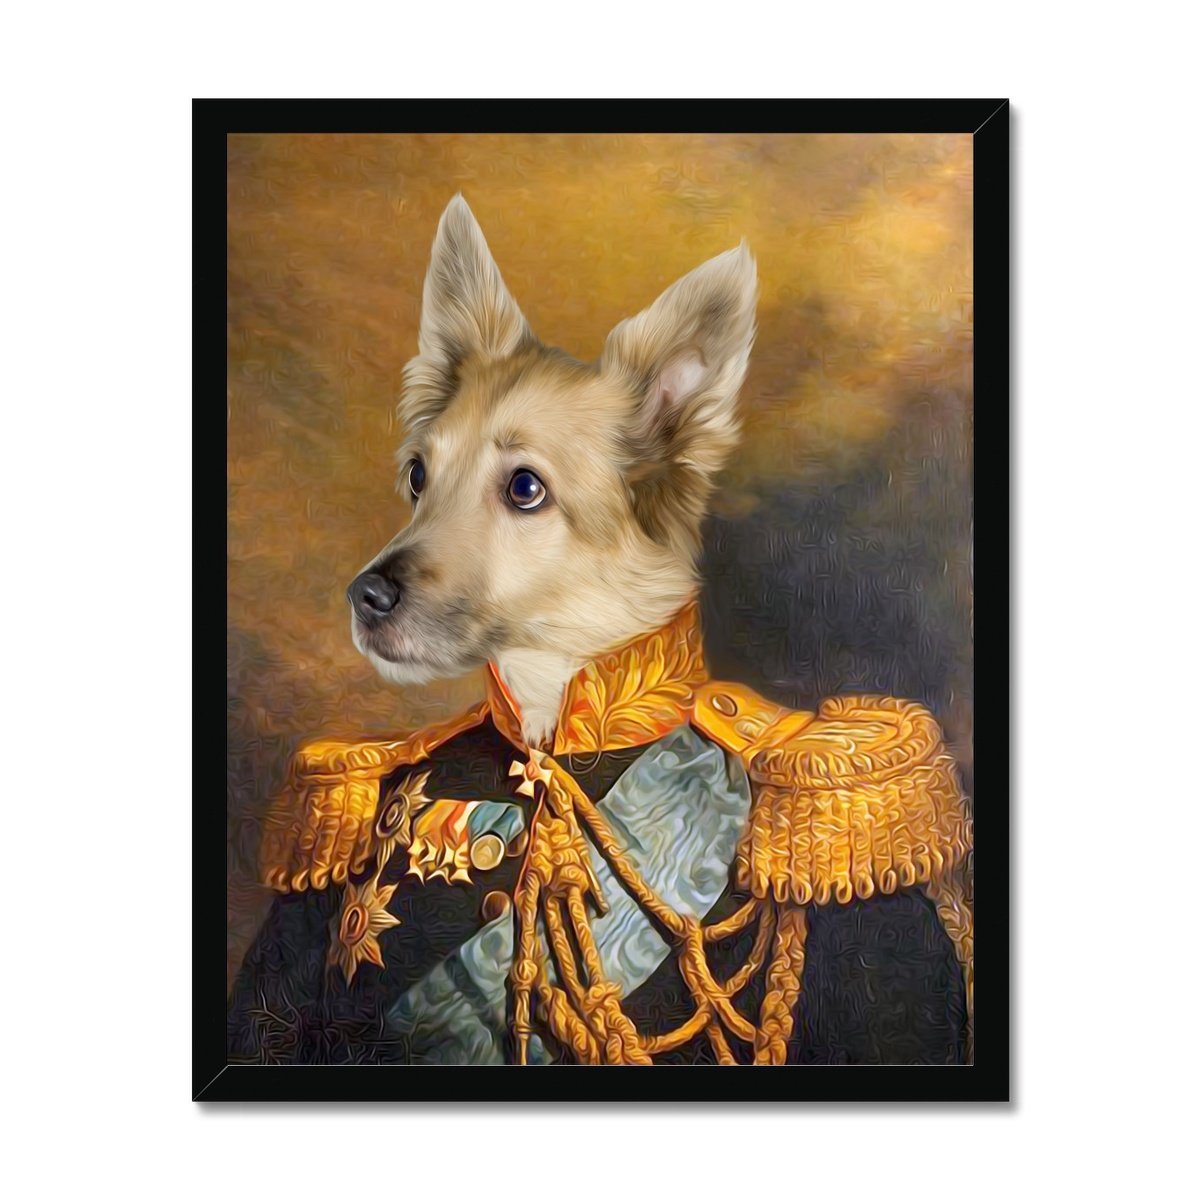 The Veteran: Custom Framed Pet Portrait - Paw & Glory, paw and glory, portrait with dog, dog into portrait, custom cat canvas, have your dog painted, websites like crown and paw, dog art from photo, pet portraits